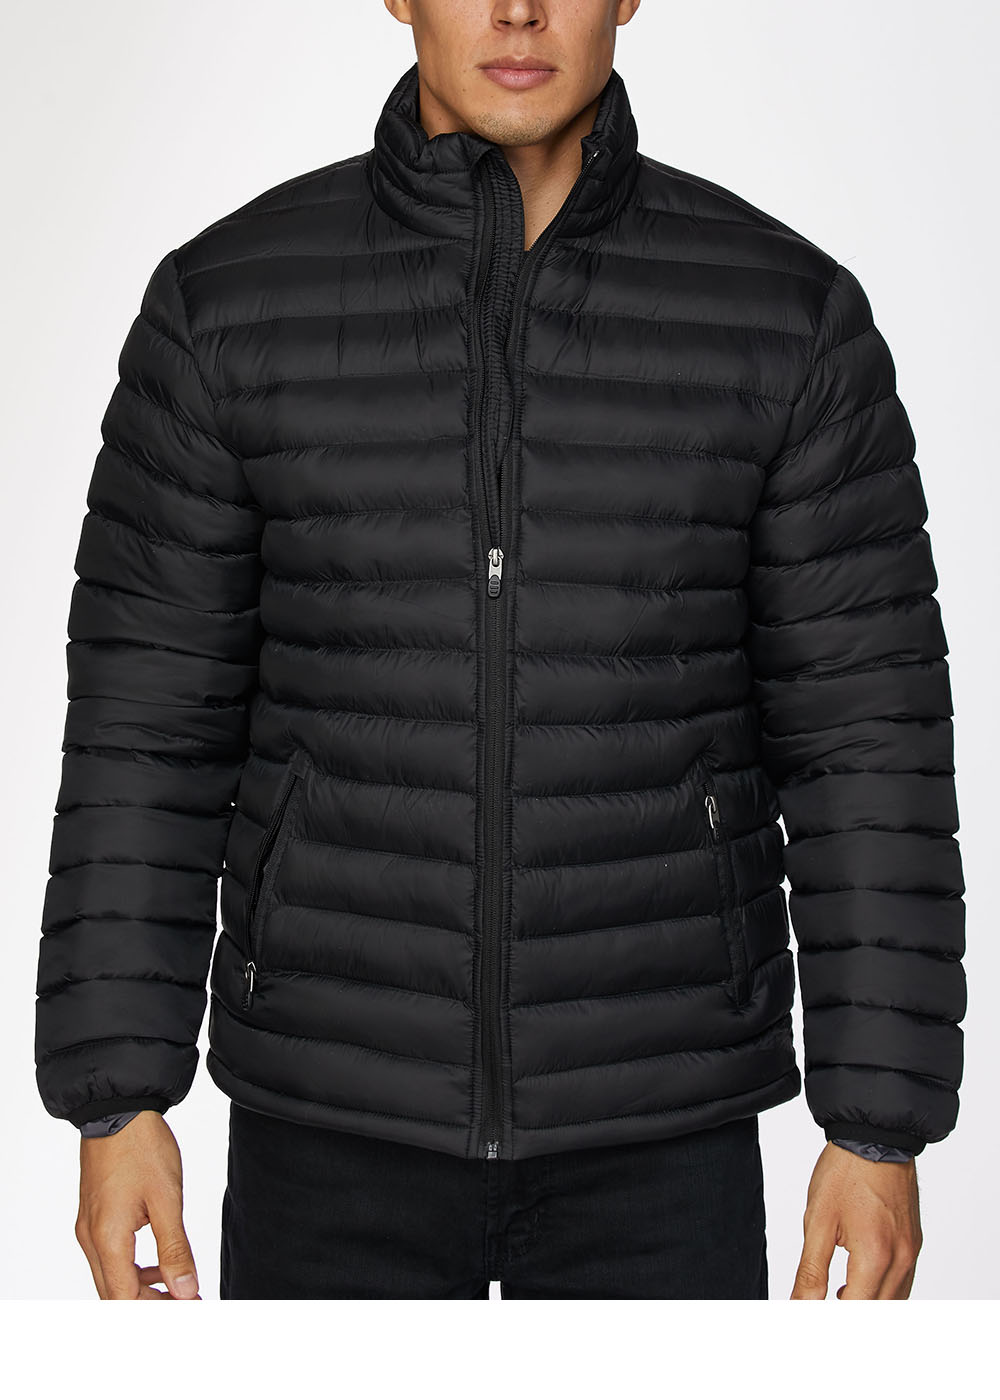  Men's High-Quality Nylon Quilted Jacket With Contrast Lining-Black